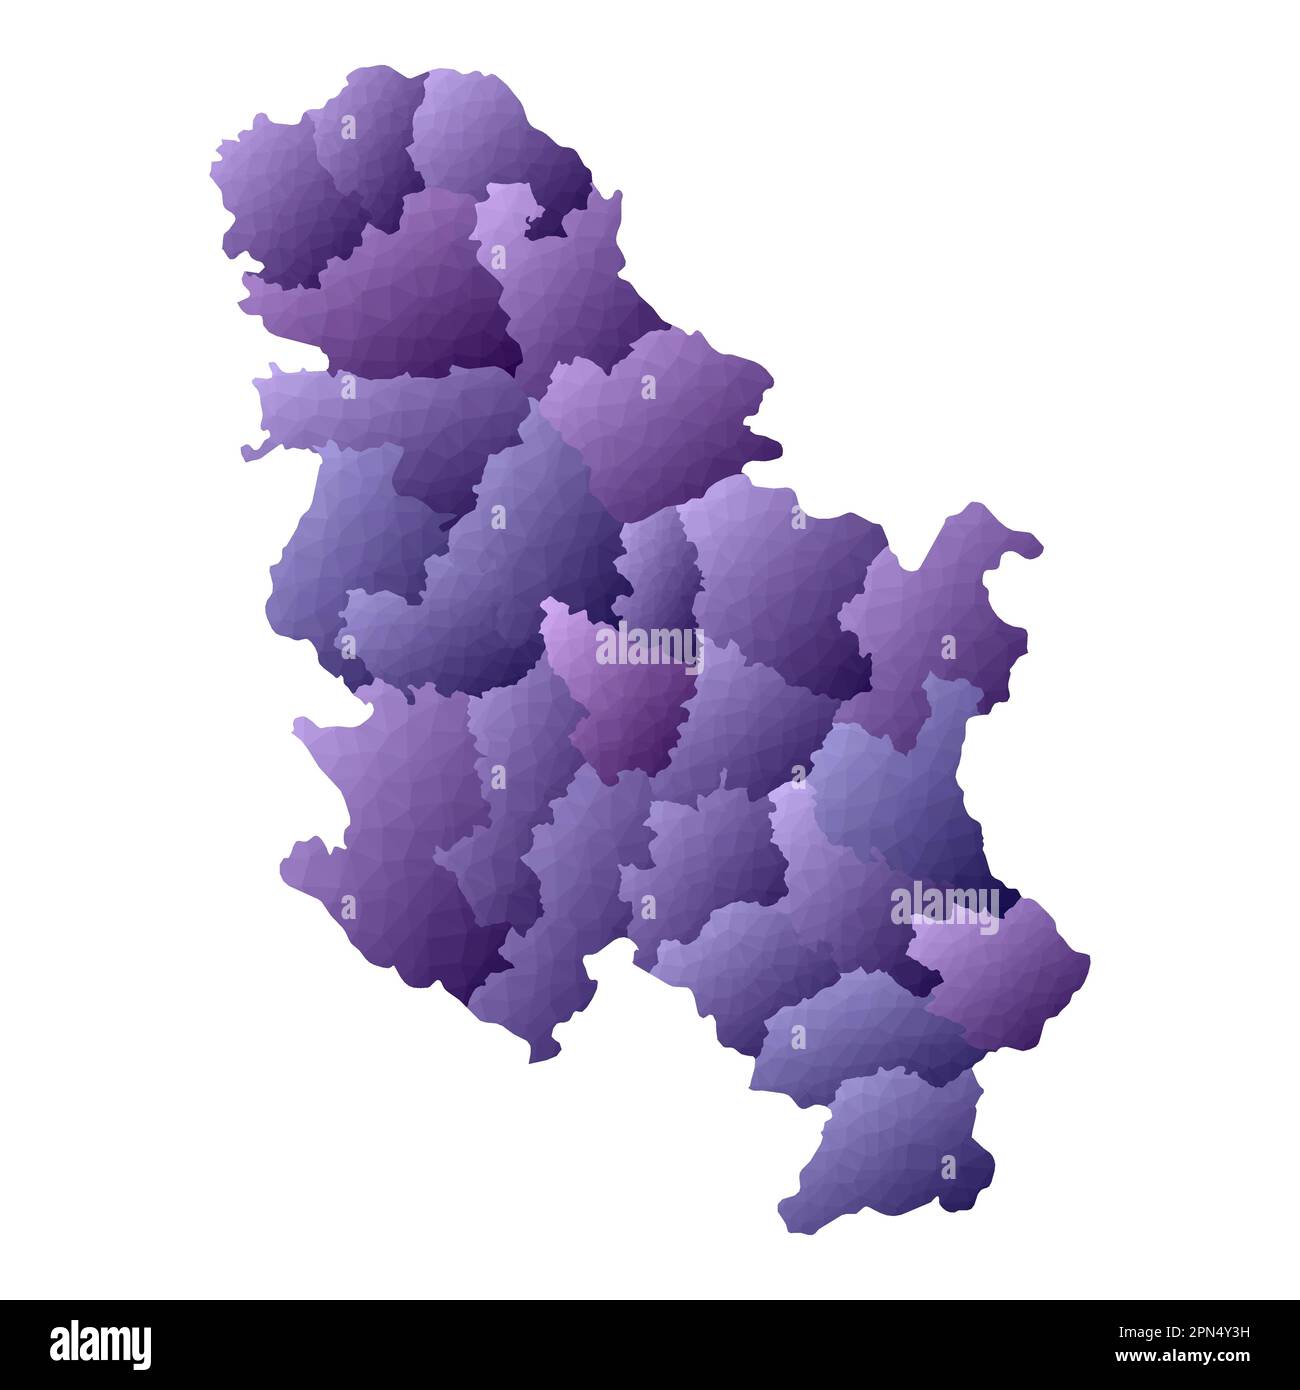 Serbia map. Geometric style country outline. Great violet vector illustration. Stock Vector